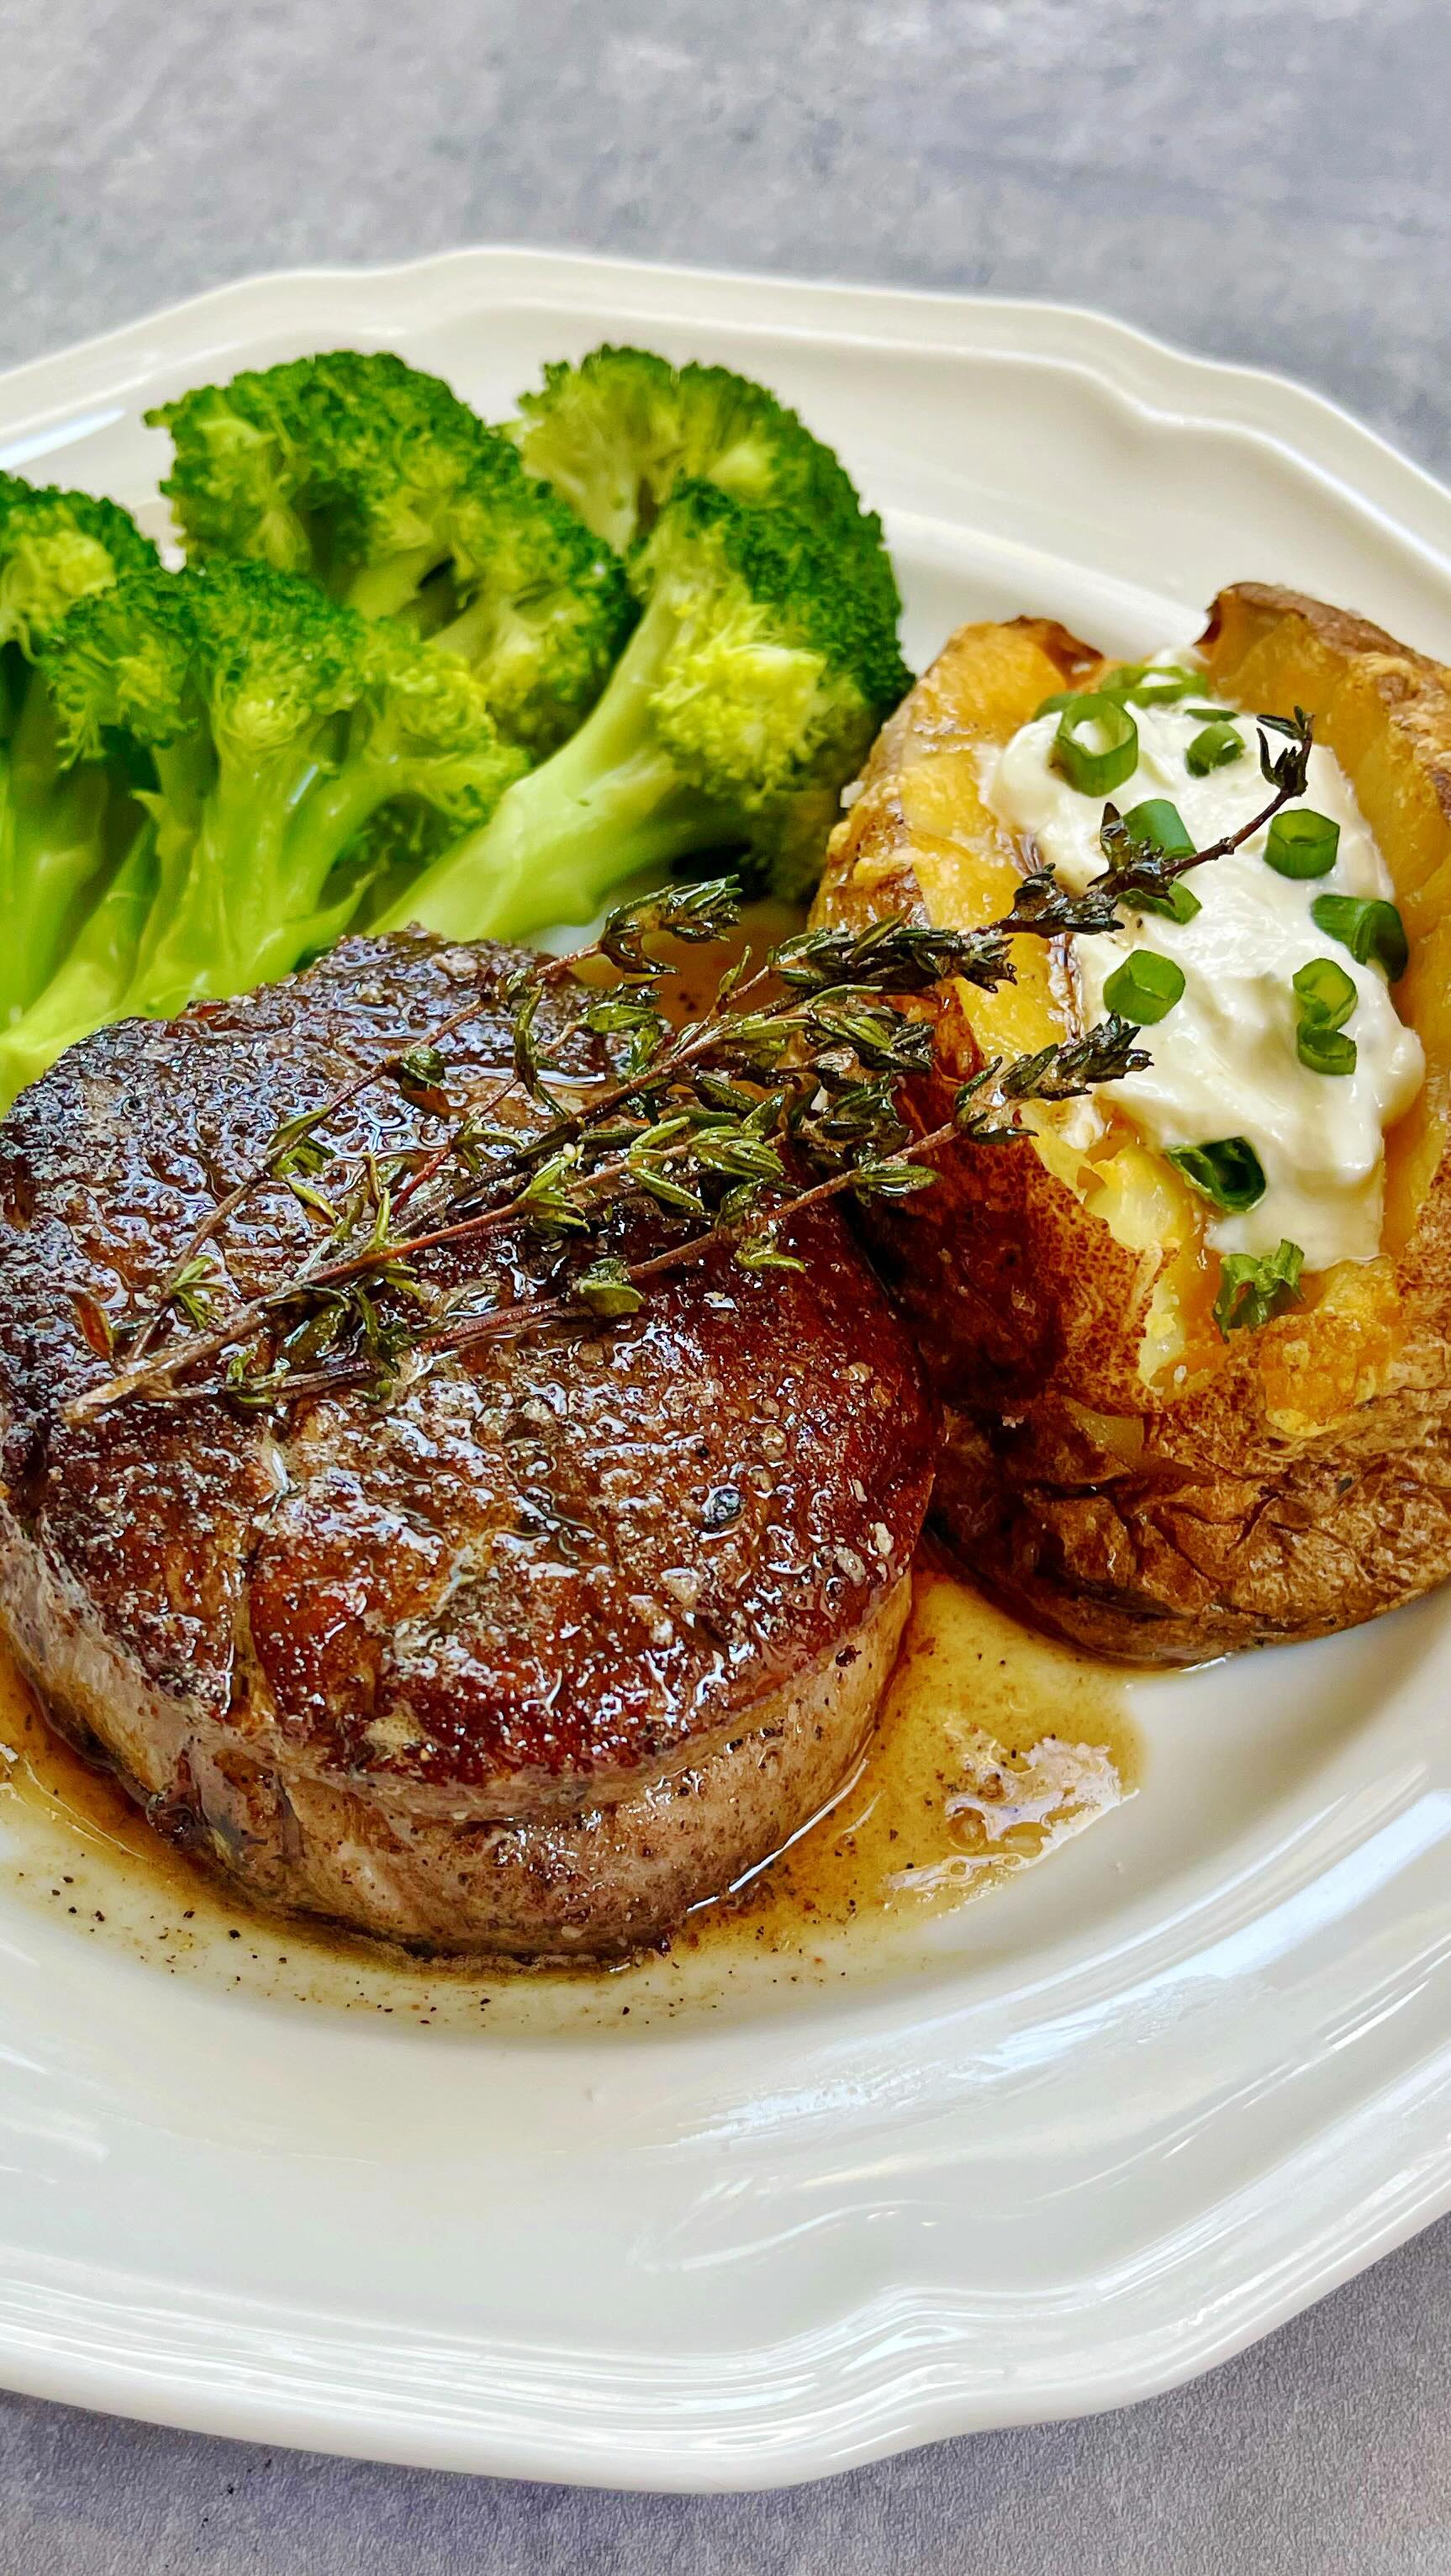 How to make the perfect medium rare steak - 5 tips you should know before you make your next filet mignon at home! Recipe and details on @dinnerreinvented #steakdinner #howtocooksteak #foodreels #cookingreels #weeknightdinner #easyrecipe #easydinner #healthyfood #dinnerreinvented #roniproter #steakandpotatoes